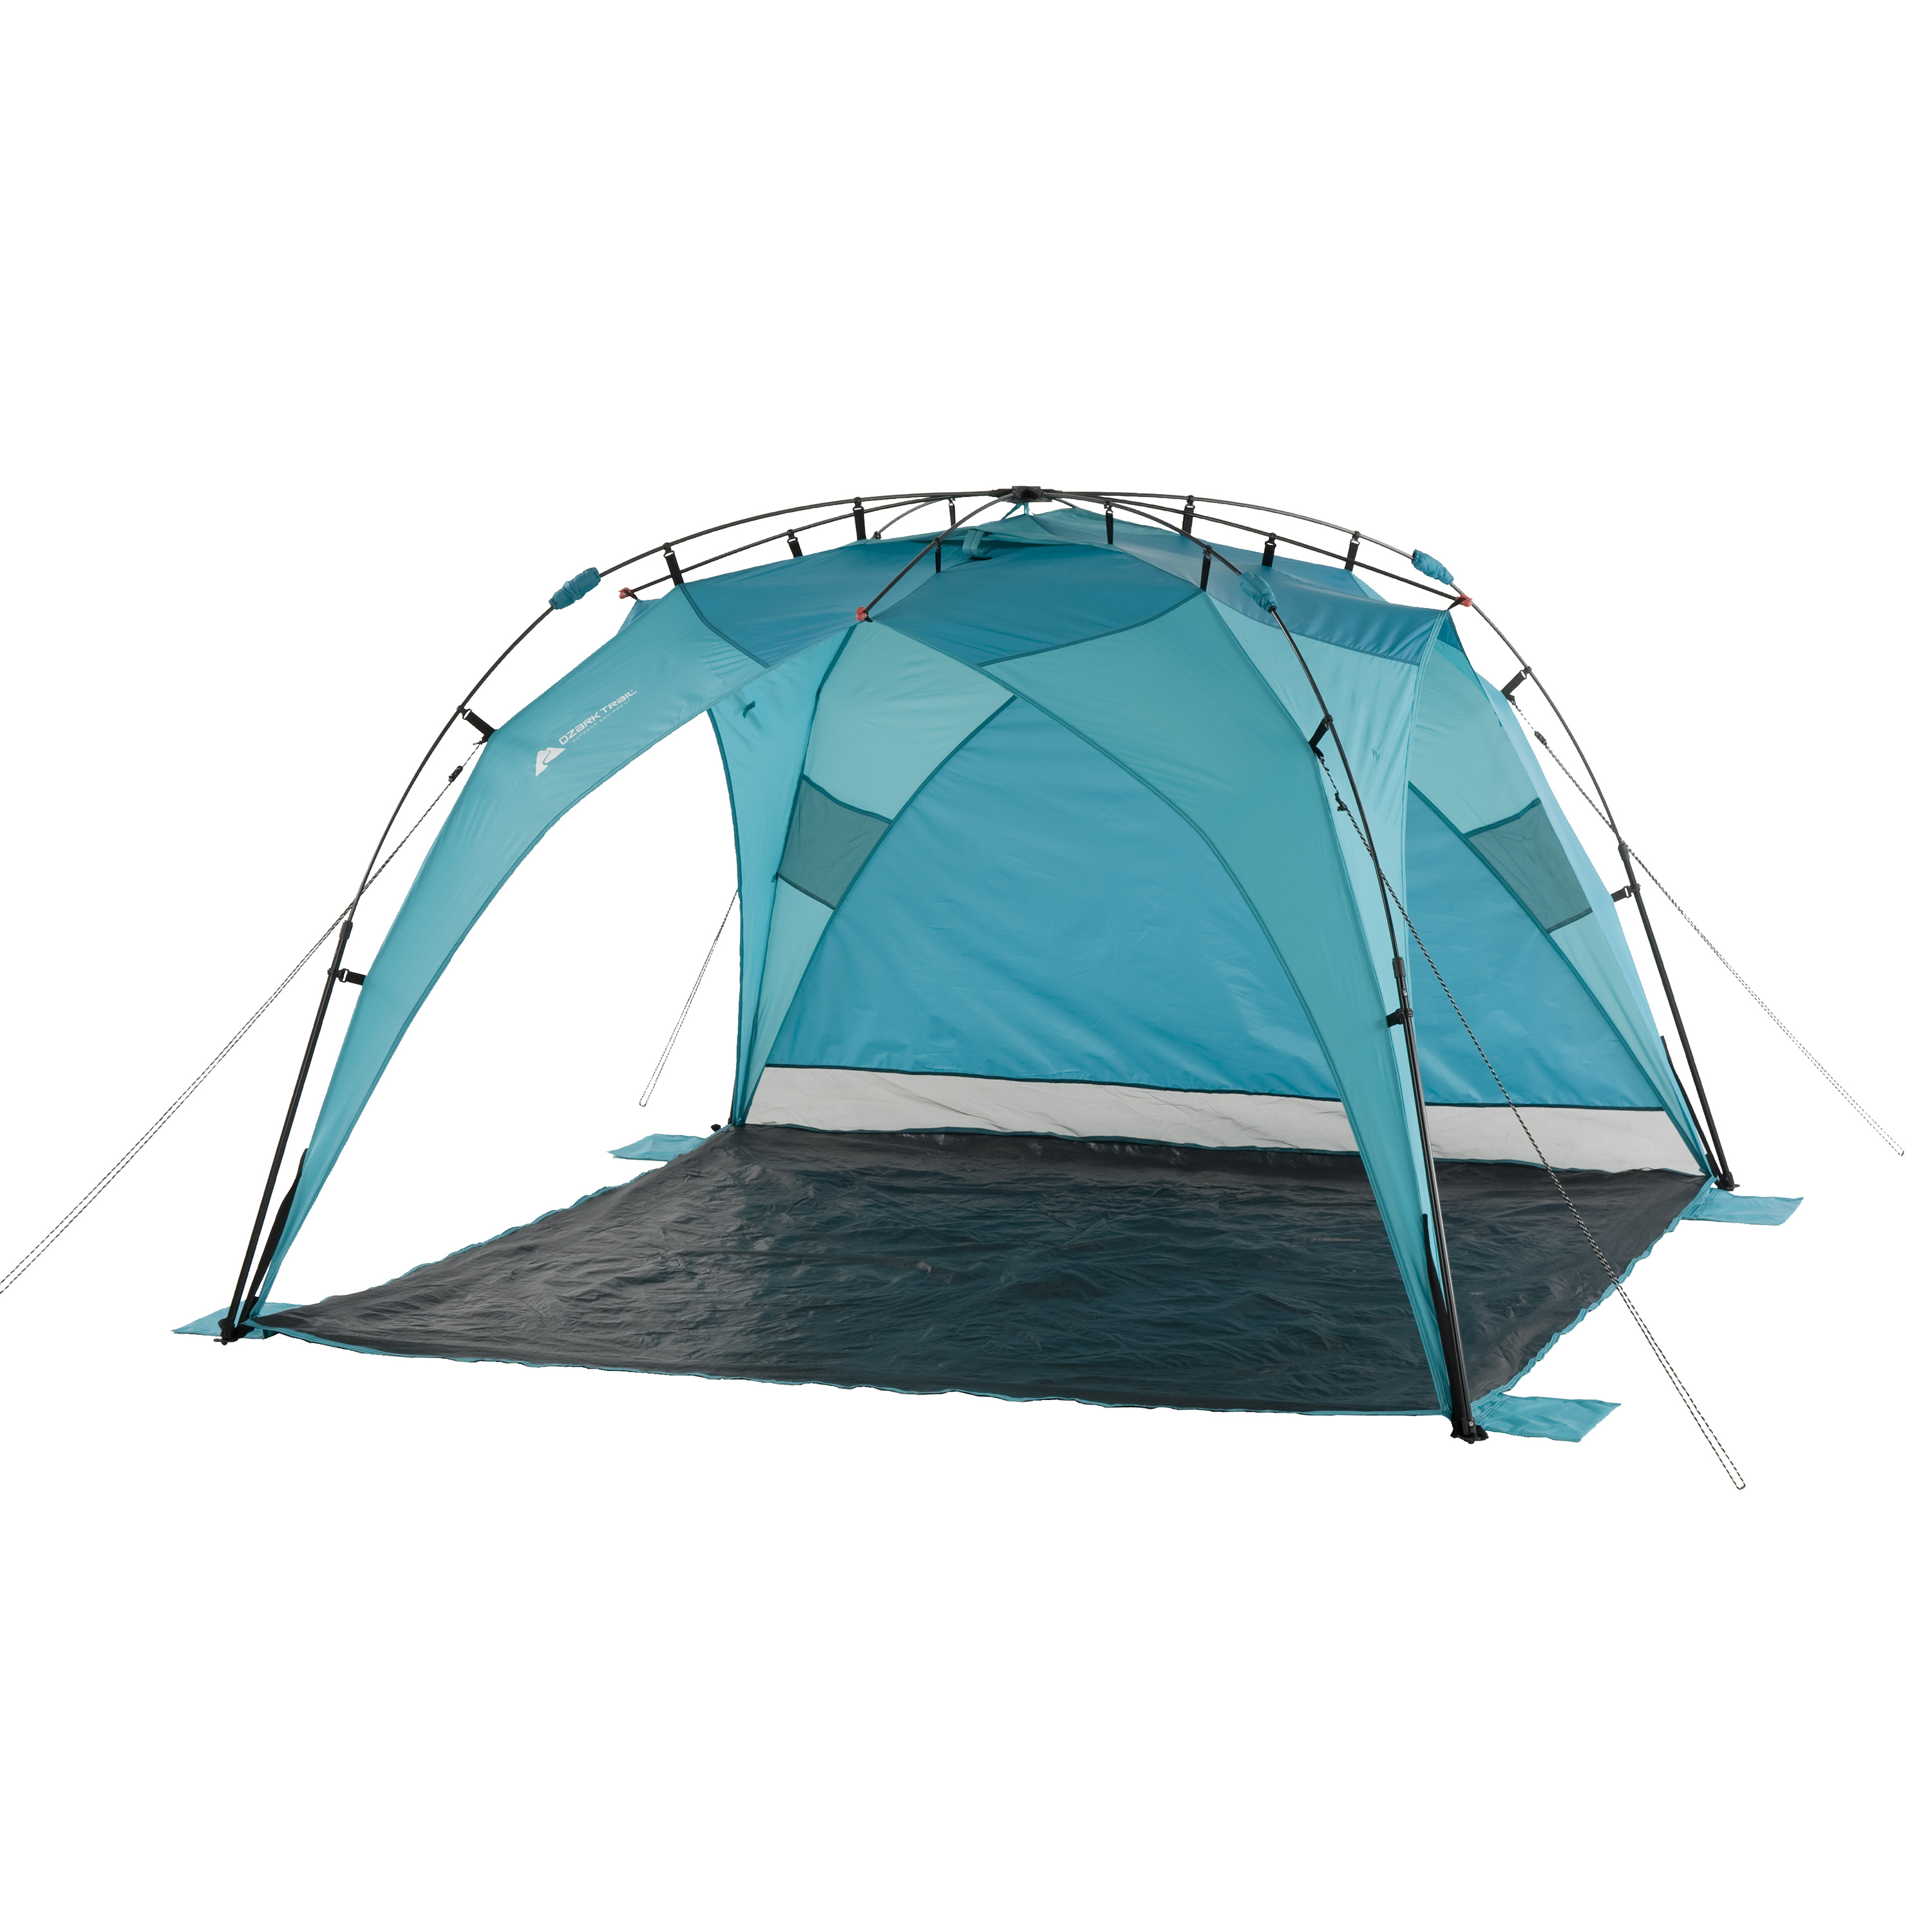 Ozark Trail 8' x 8' Instant Sun Shade (64 Square feet Coverage) - image 2 of 5